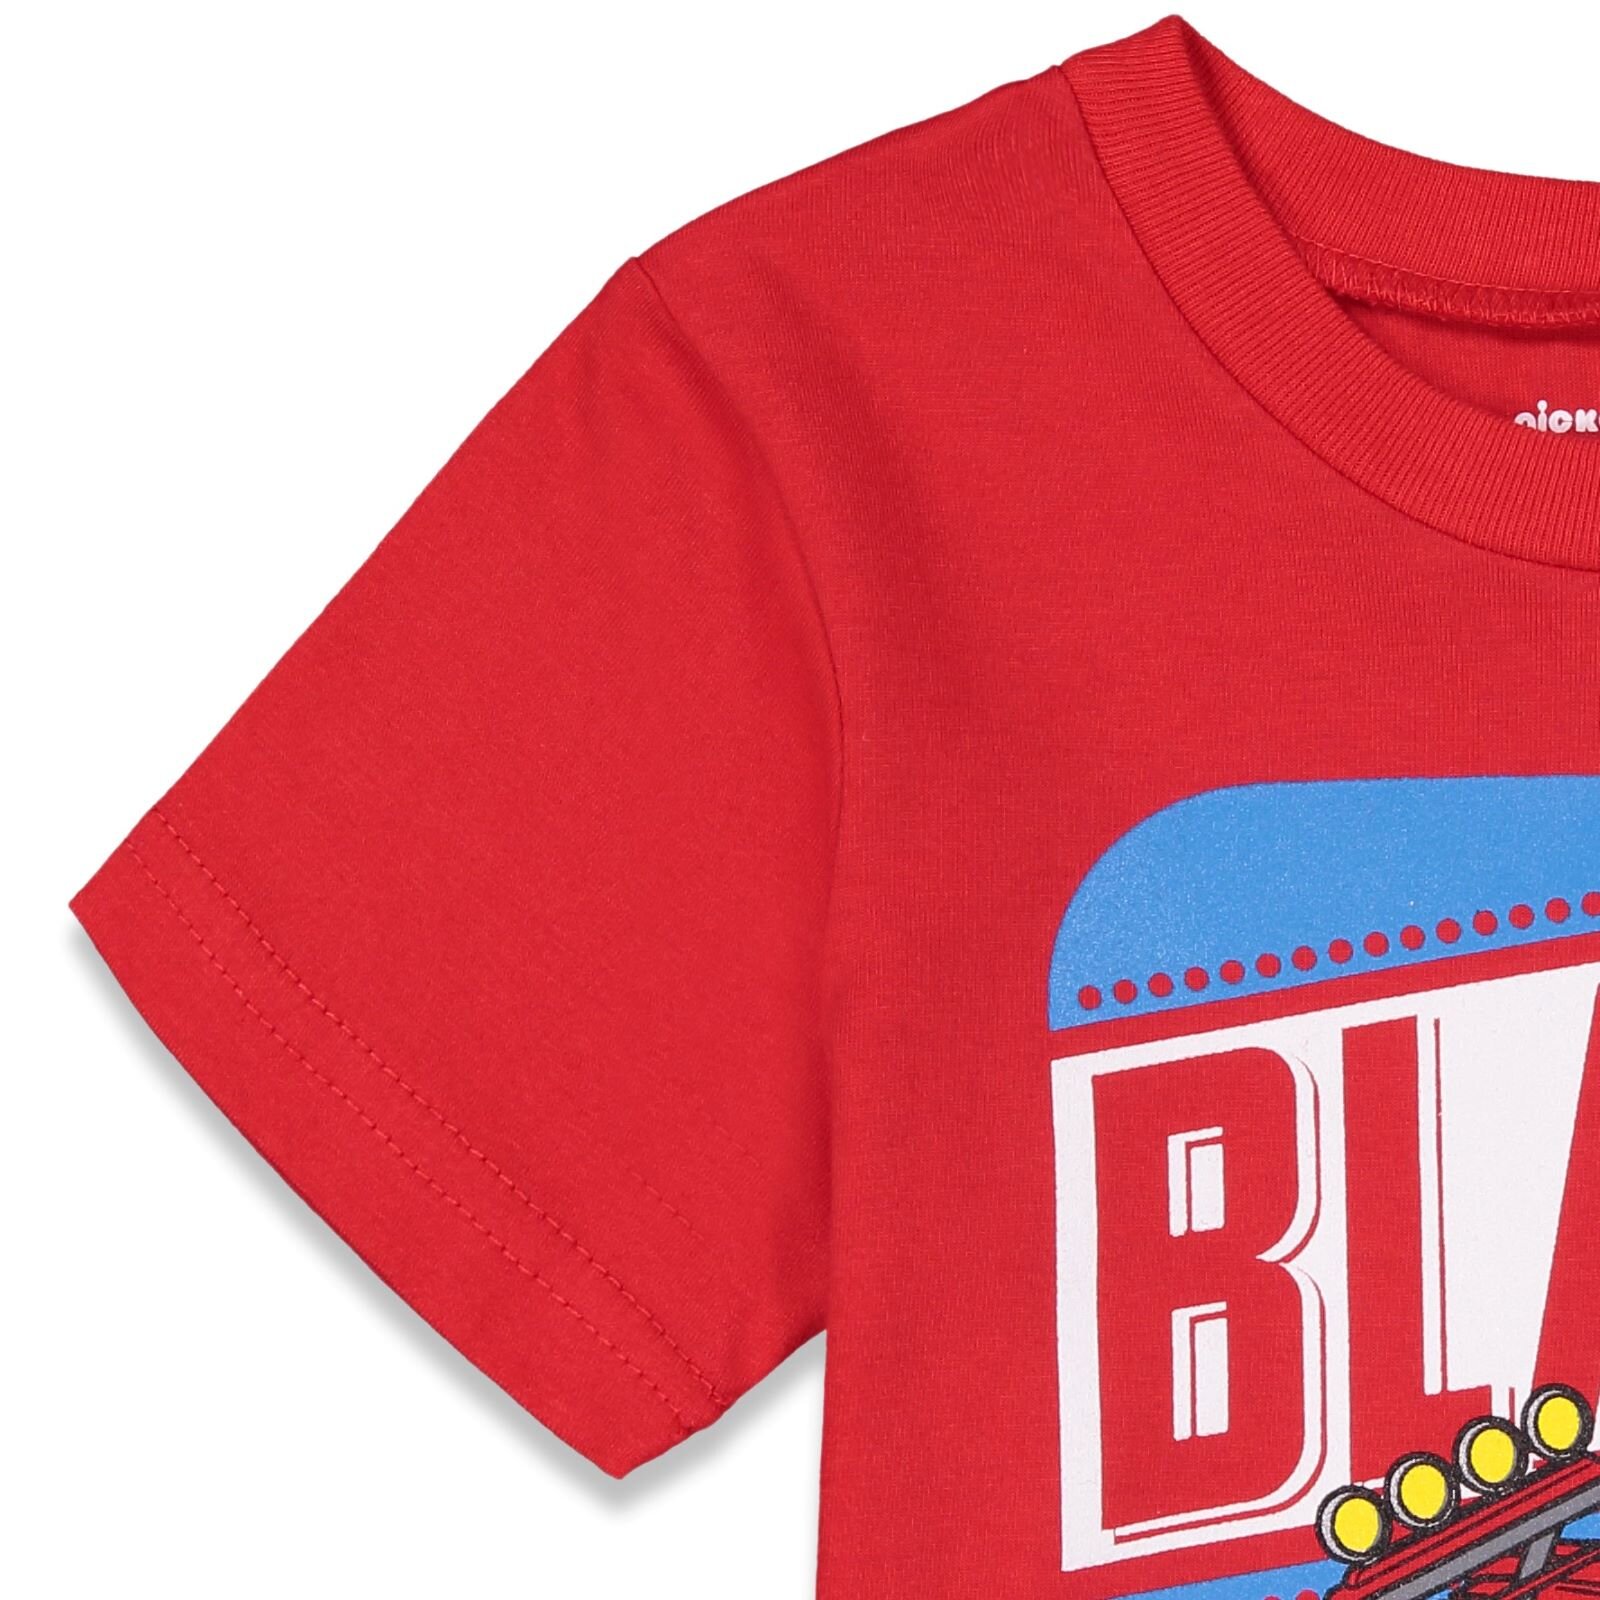 Blaze and the Monster Machines Little Boys Graphic T-Shirt Mesh Shorts Outfit Set Red / Black 6 - image 4 of 5